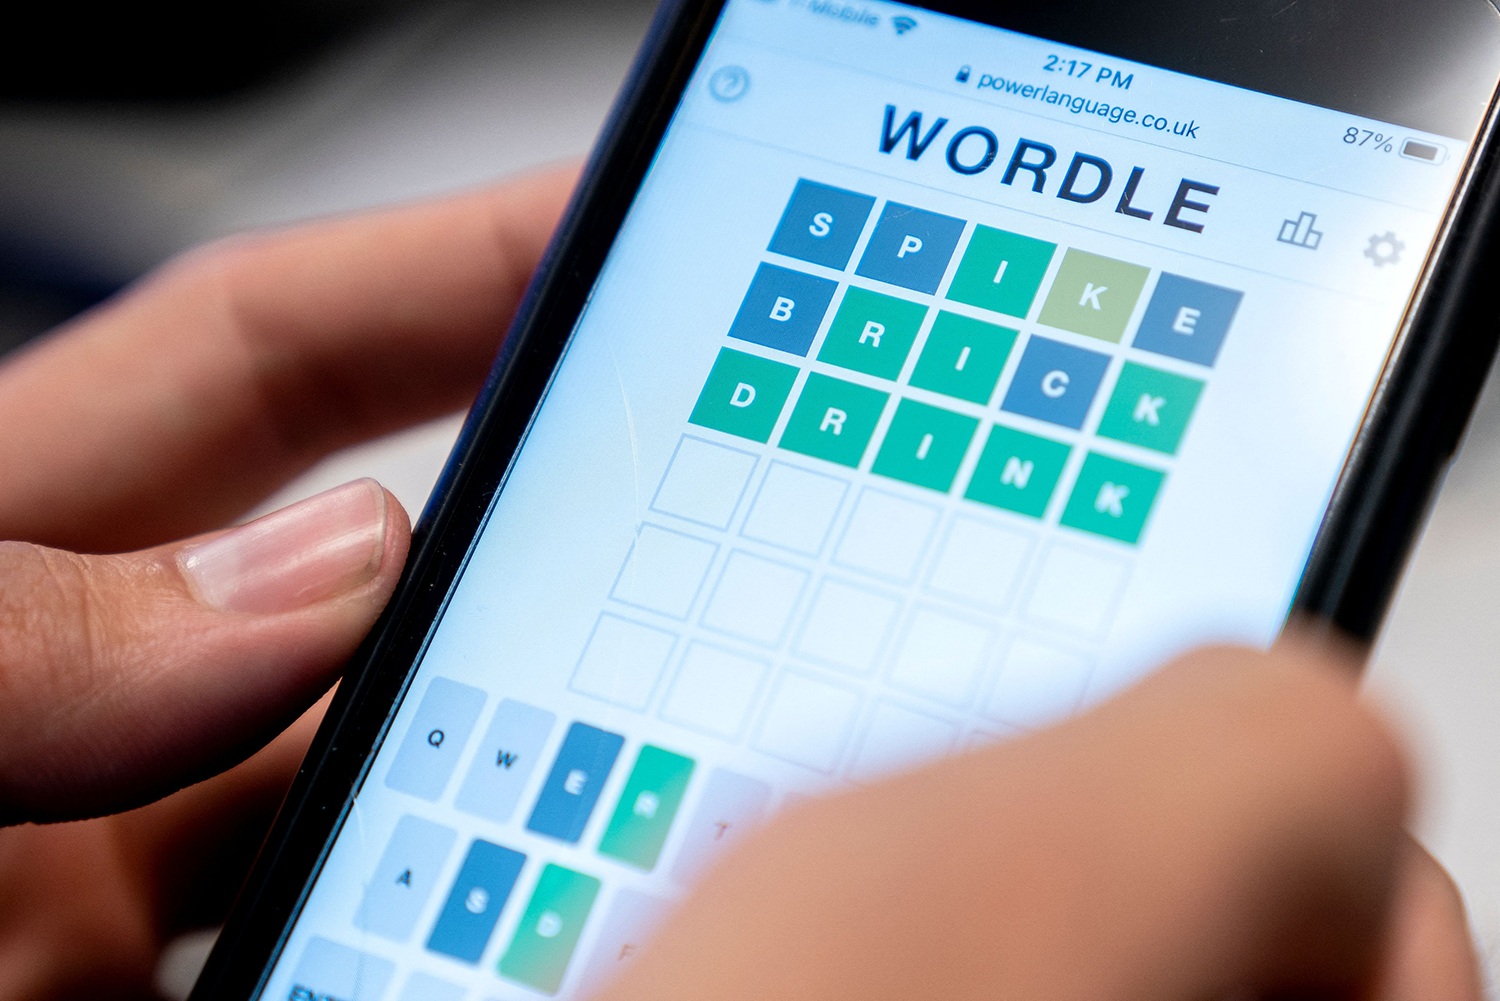 The web-based word game Wordle being played on a mobile phone